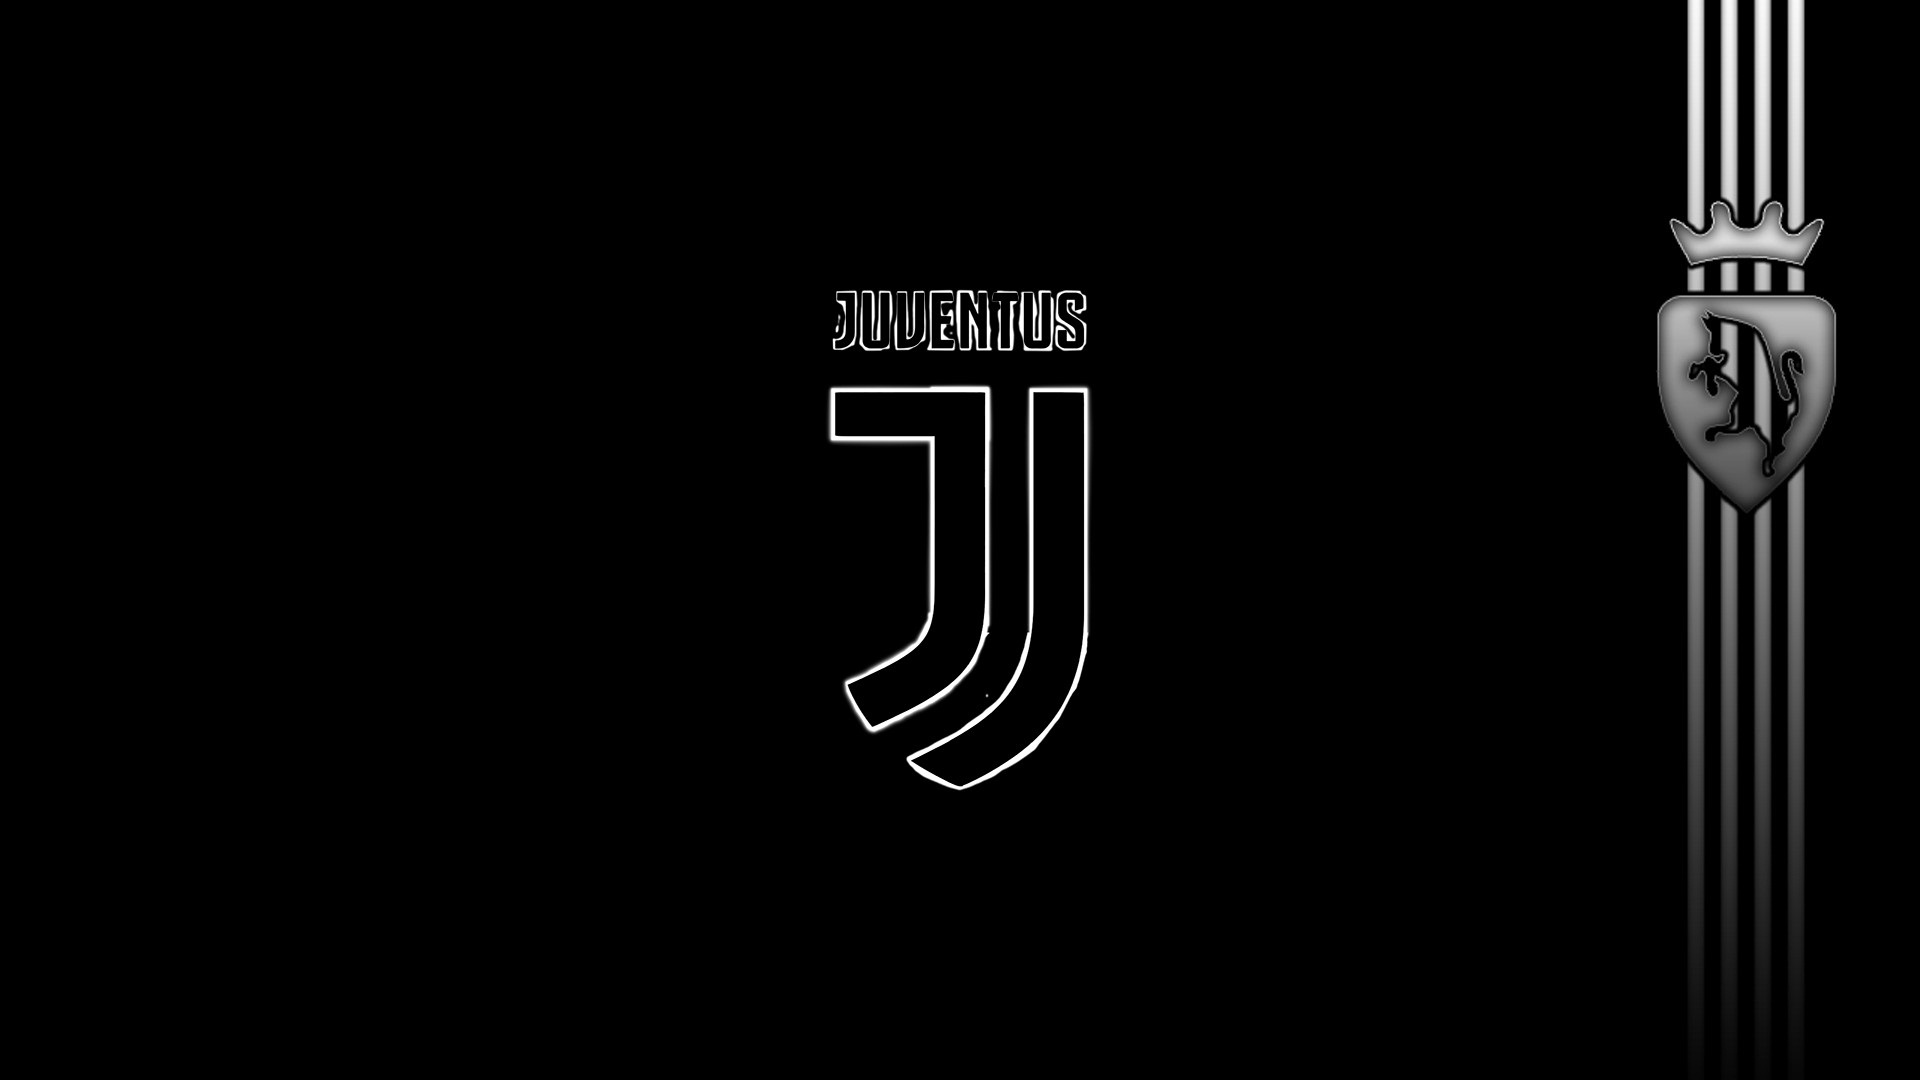 Wallpaper Desktop Juventus Logo HD with resolution 1920x1080 pixel. You can make this wallpaper for your Mac or Windows Desktop Background, iPhone, Android or Tablet and another Smartphone device